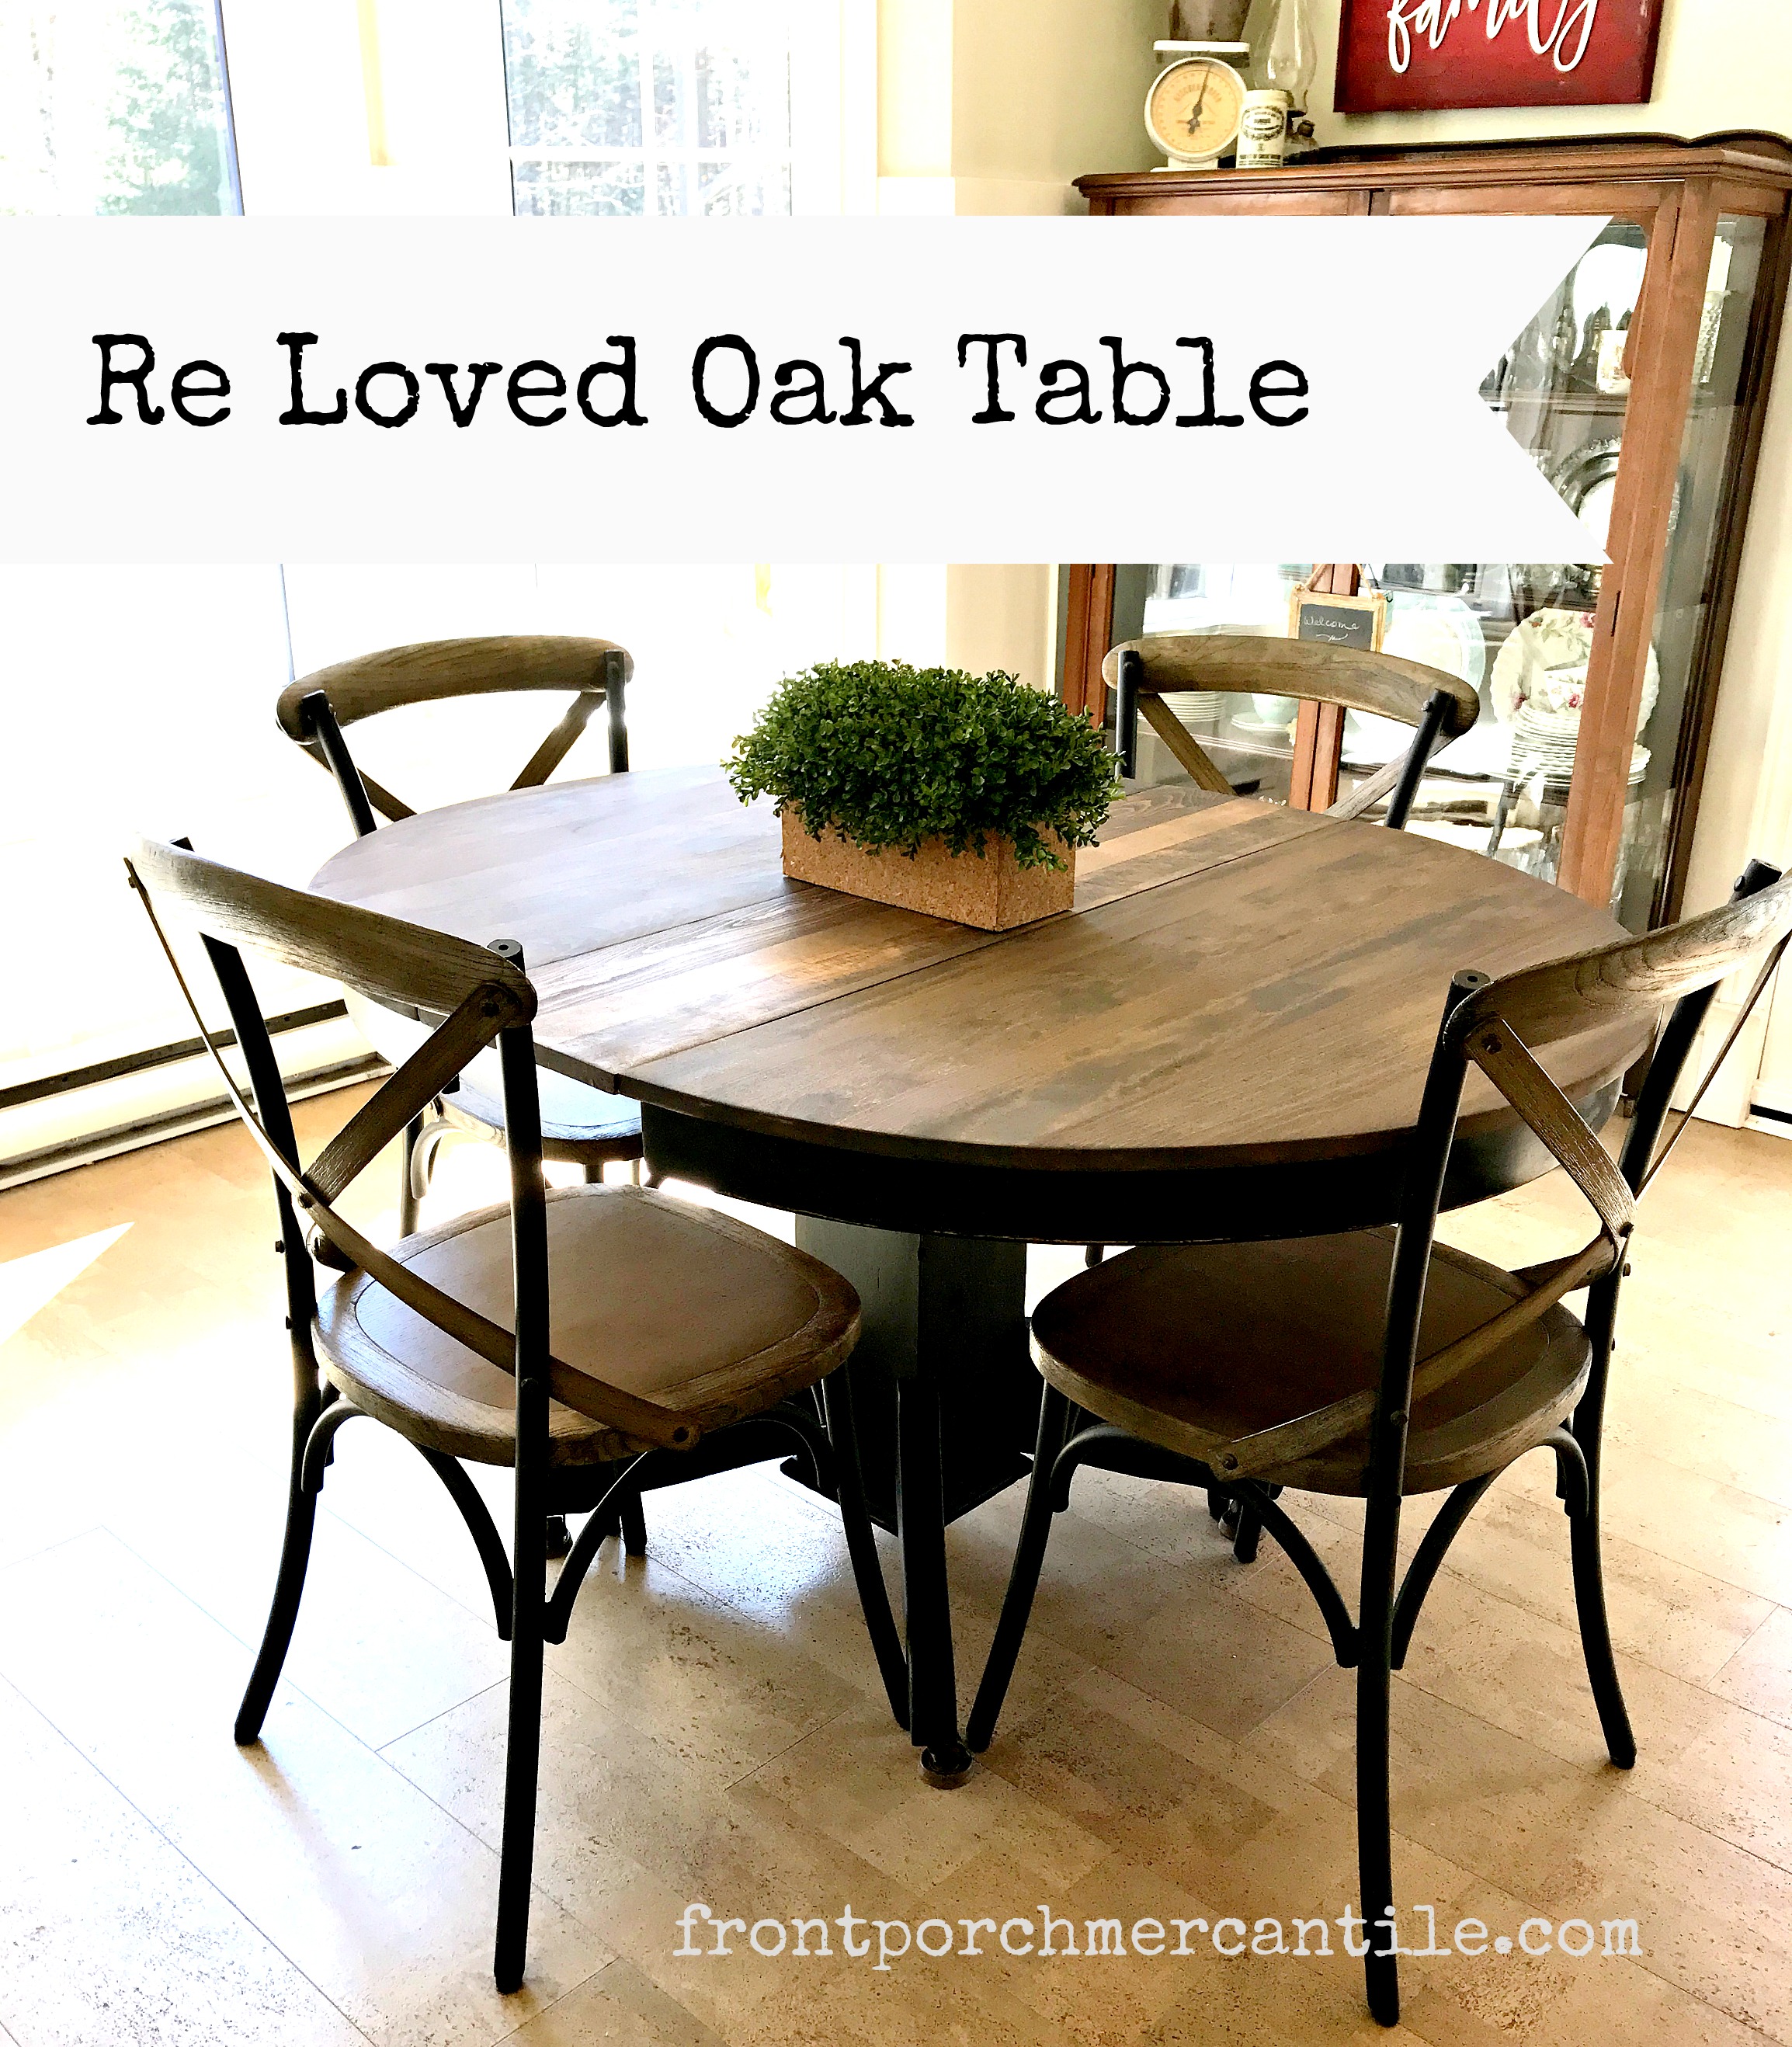 Re loved Oak Table with Miss Mustard Seed's Milk Paint and Stain and Oil Front Porch Mercantile